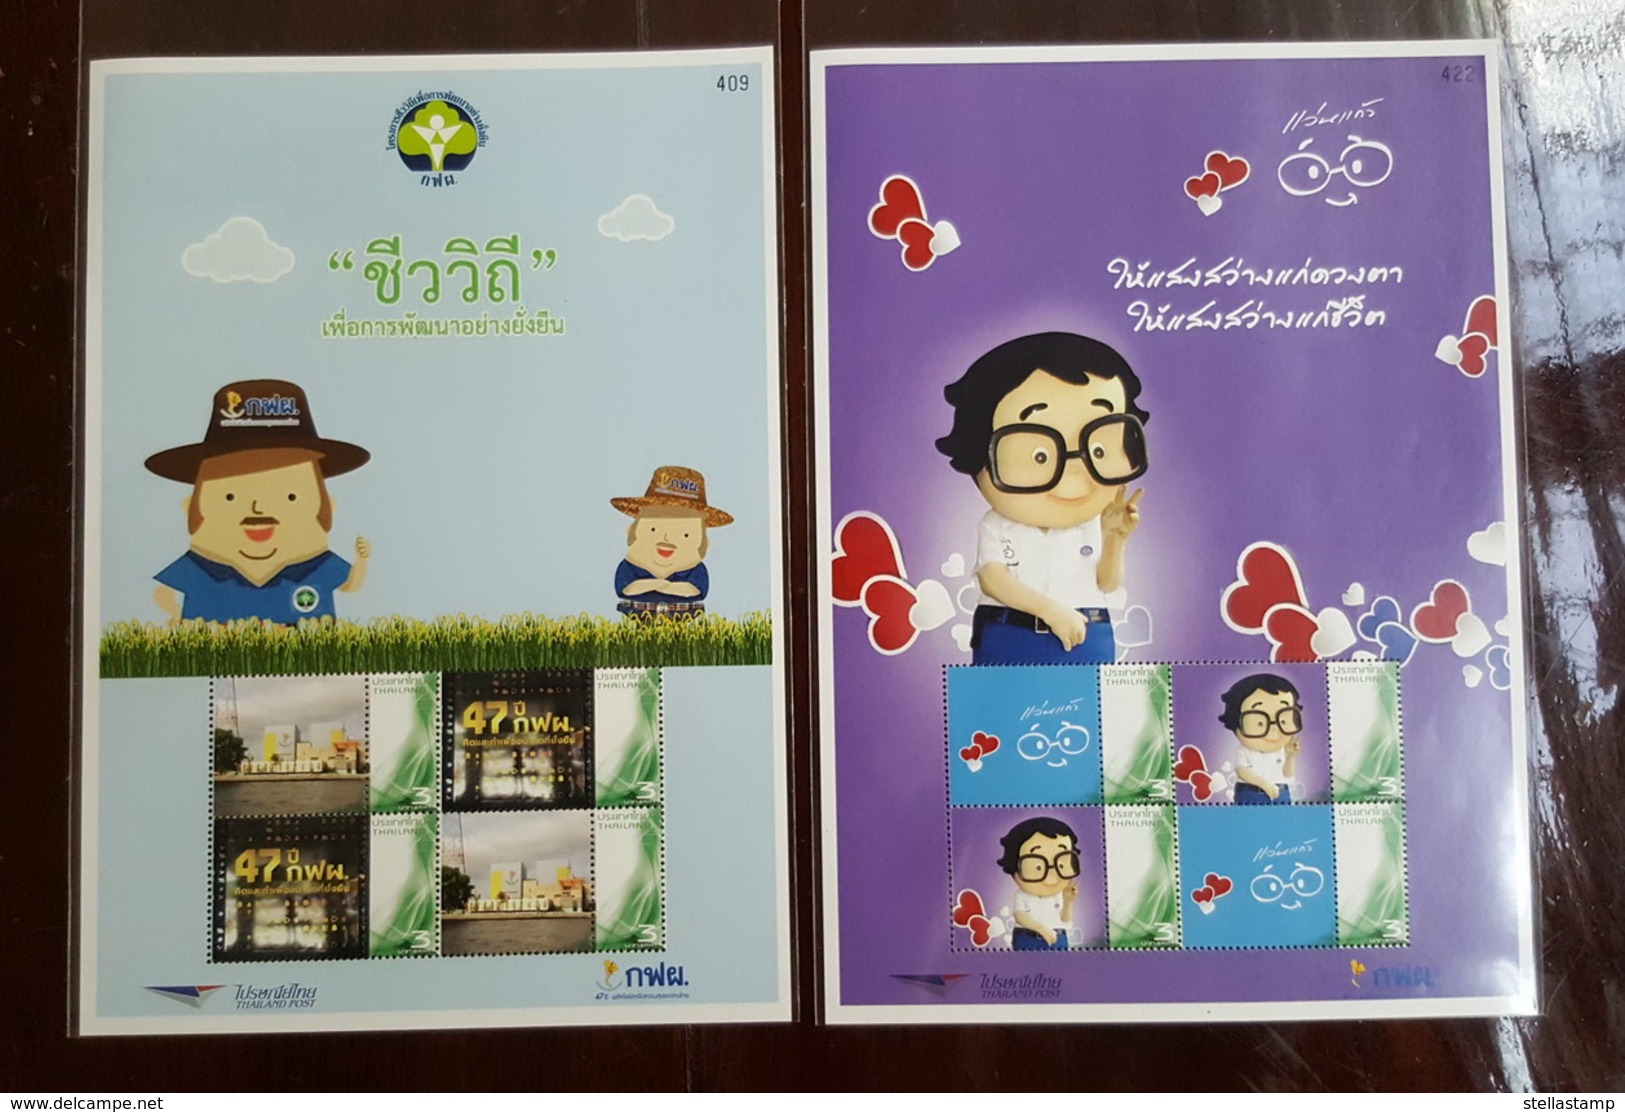 Thailand Stamp Personalized 2016 47th Electricity Generating Authority Of Thai - EGAT (2) - Thailand